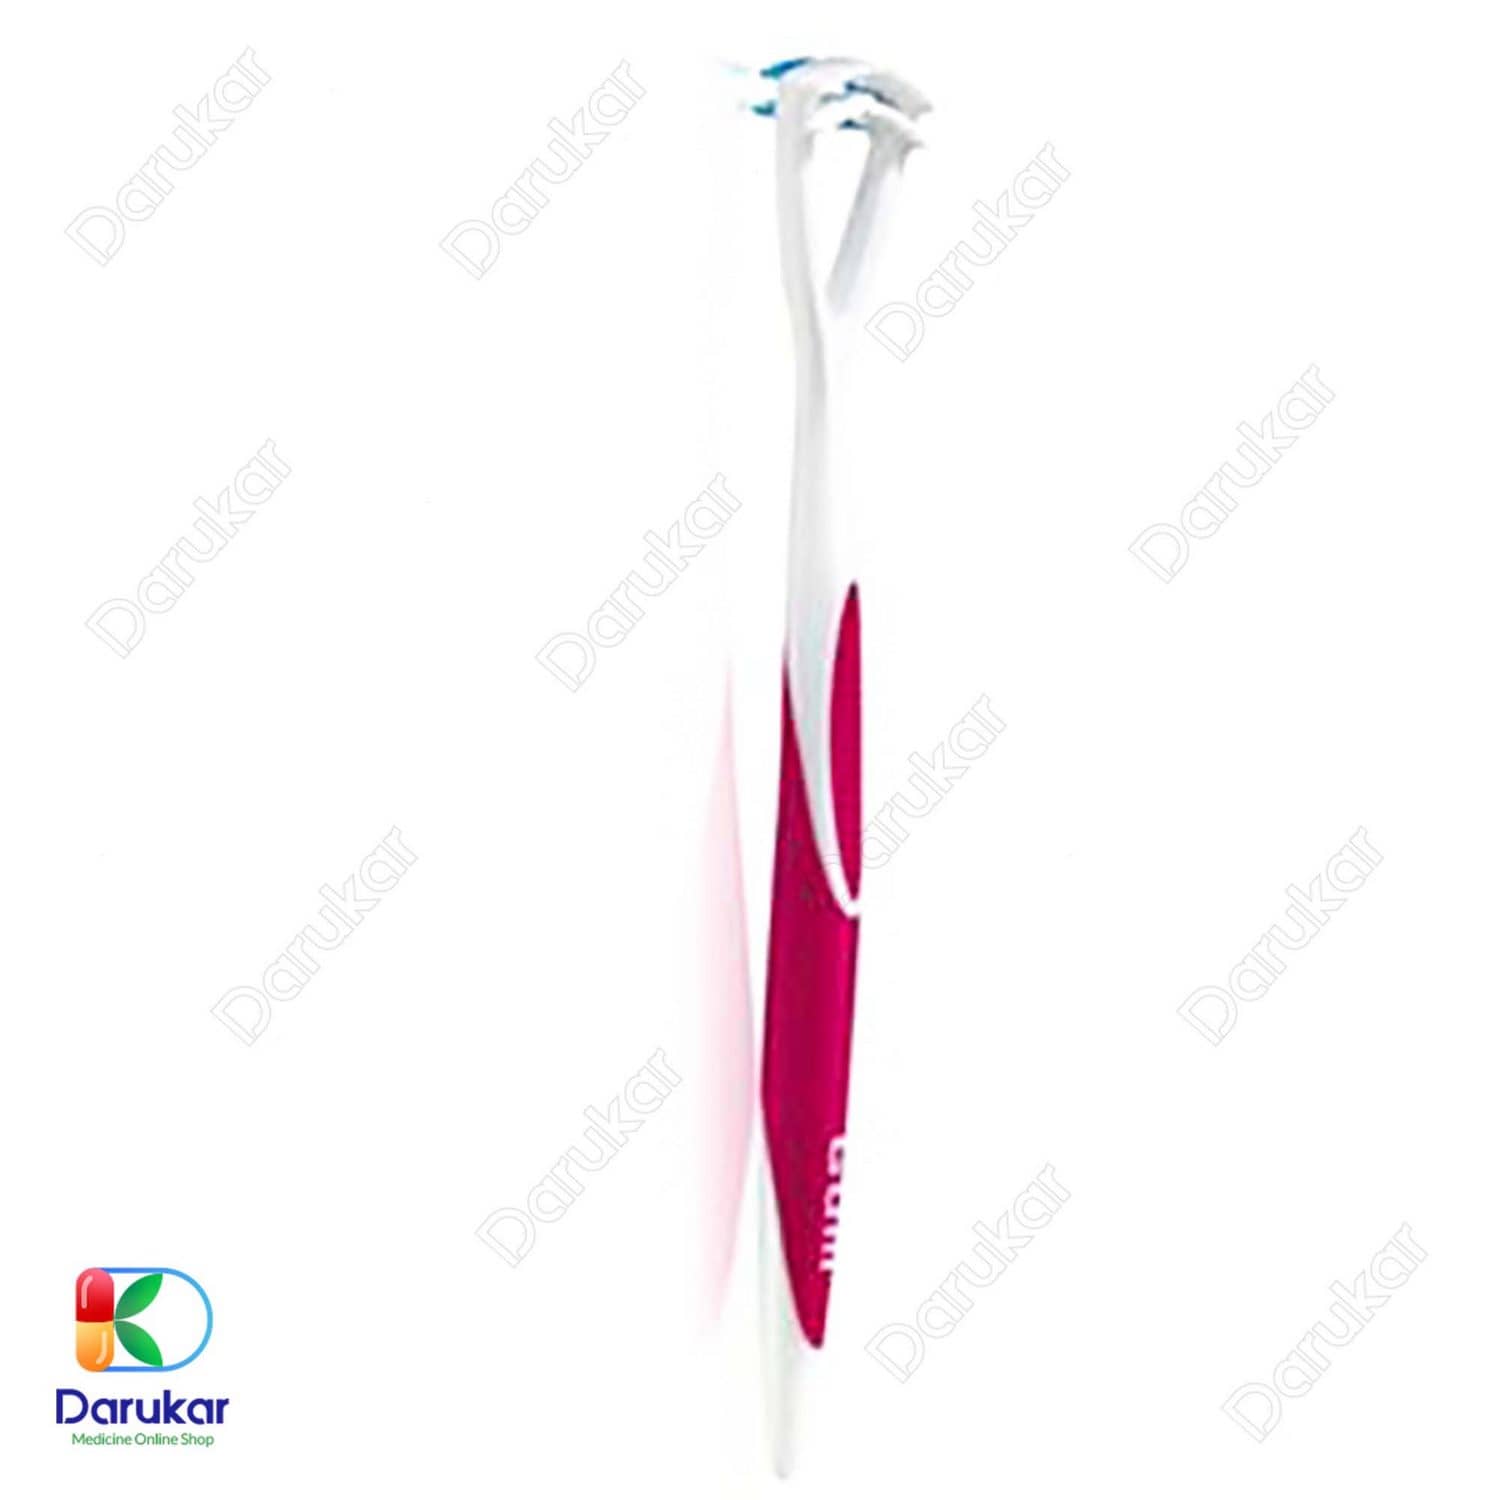 G.U.M Tongue Cleaner Tooth Brush 760 Image Gallery 1